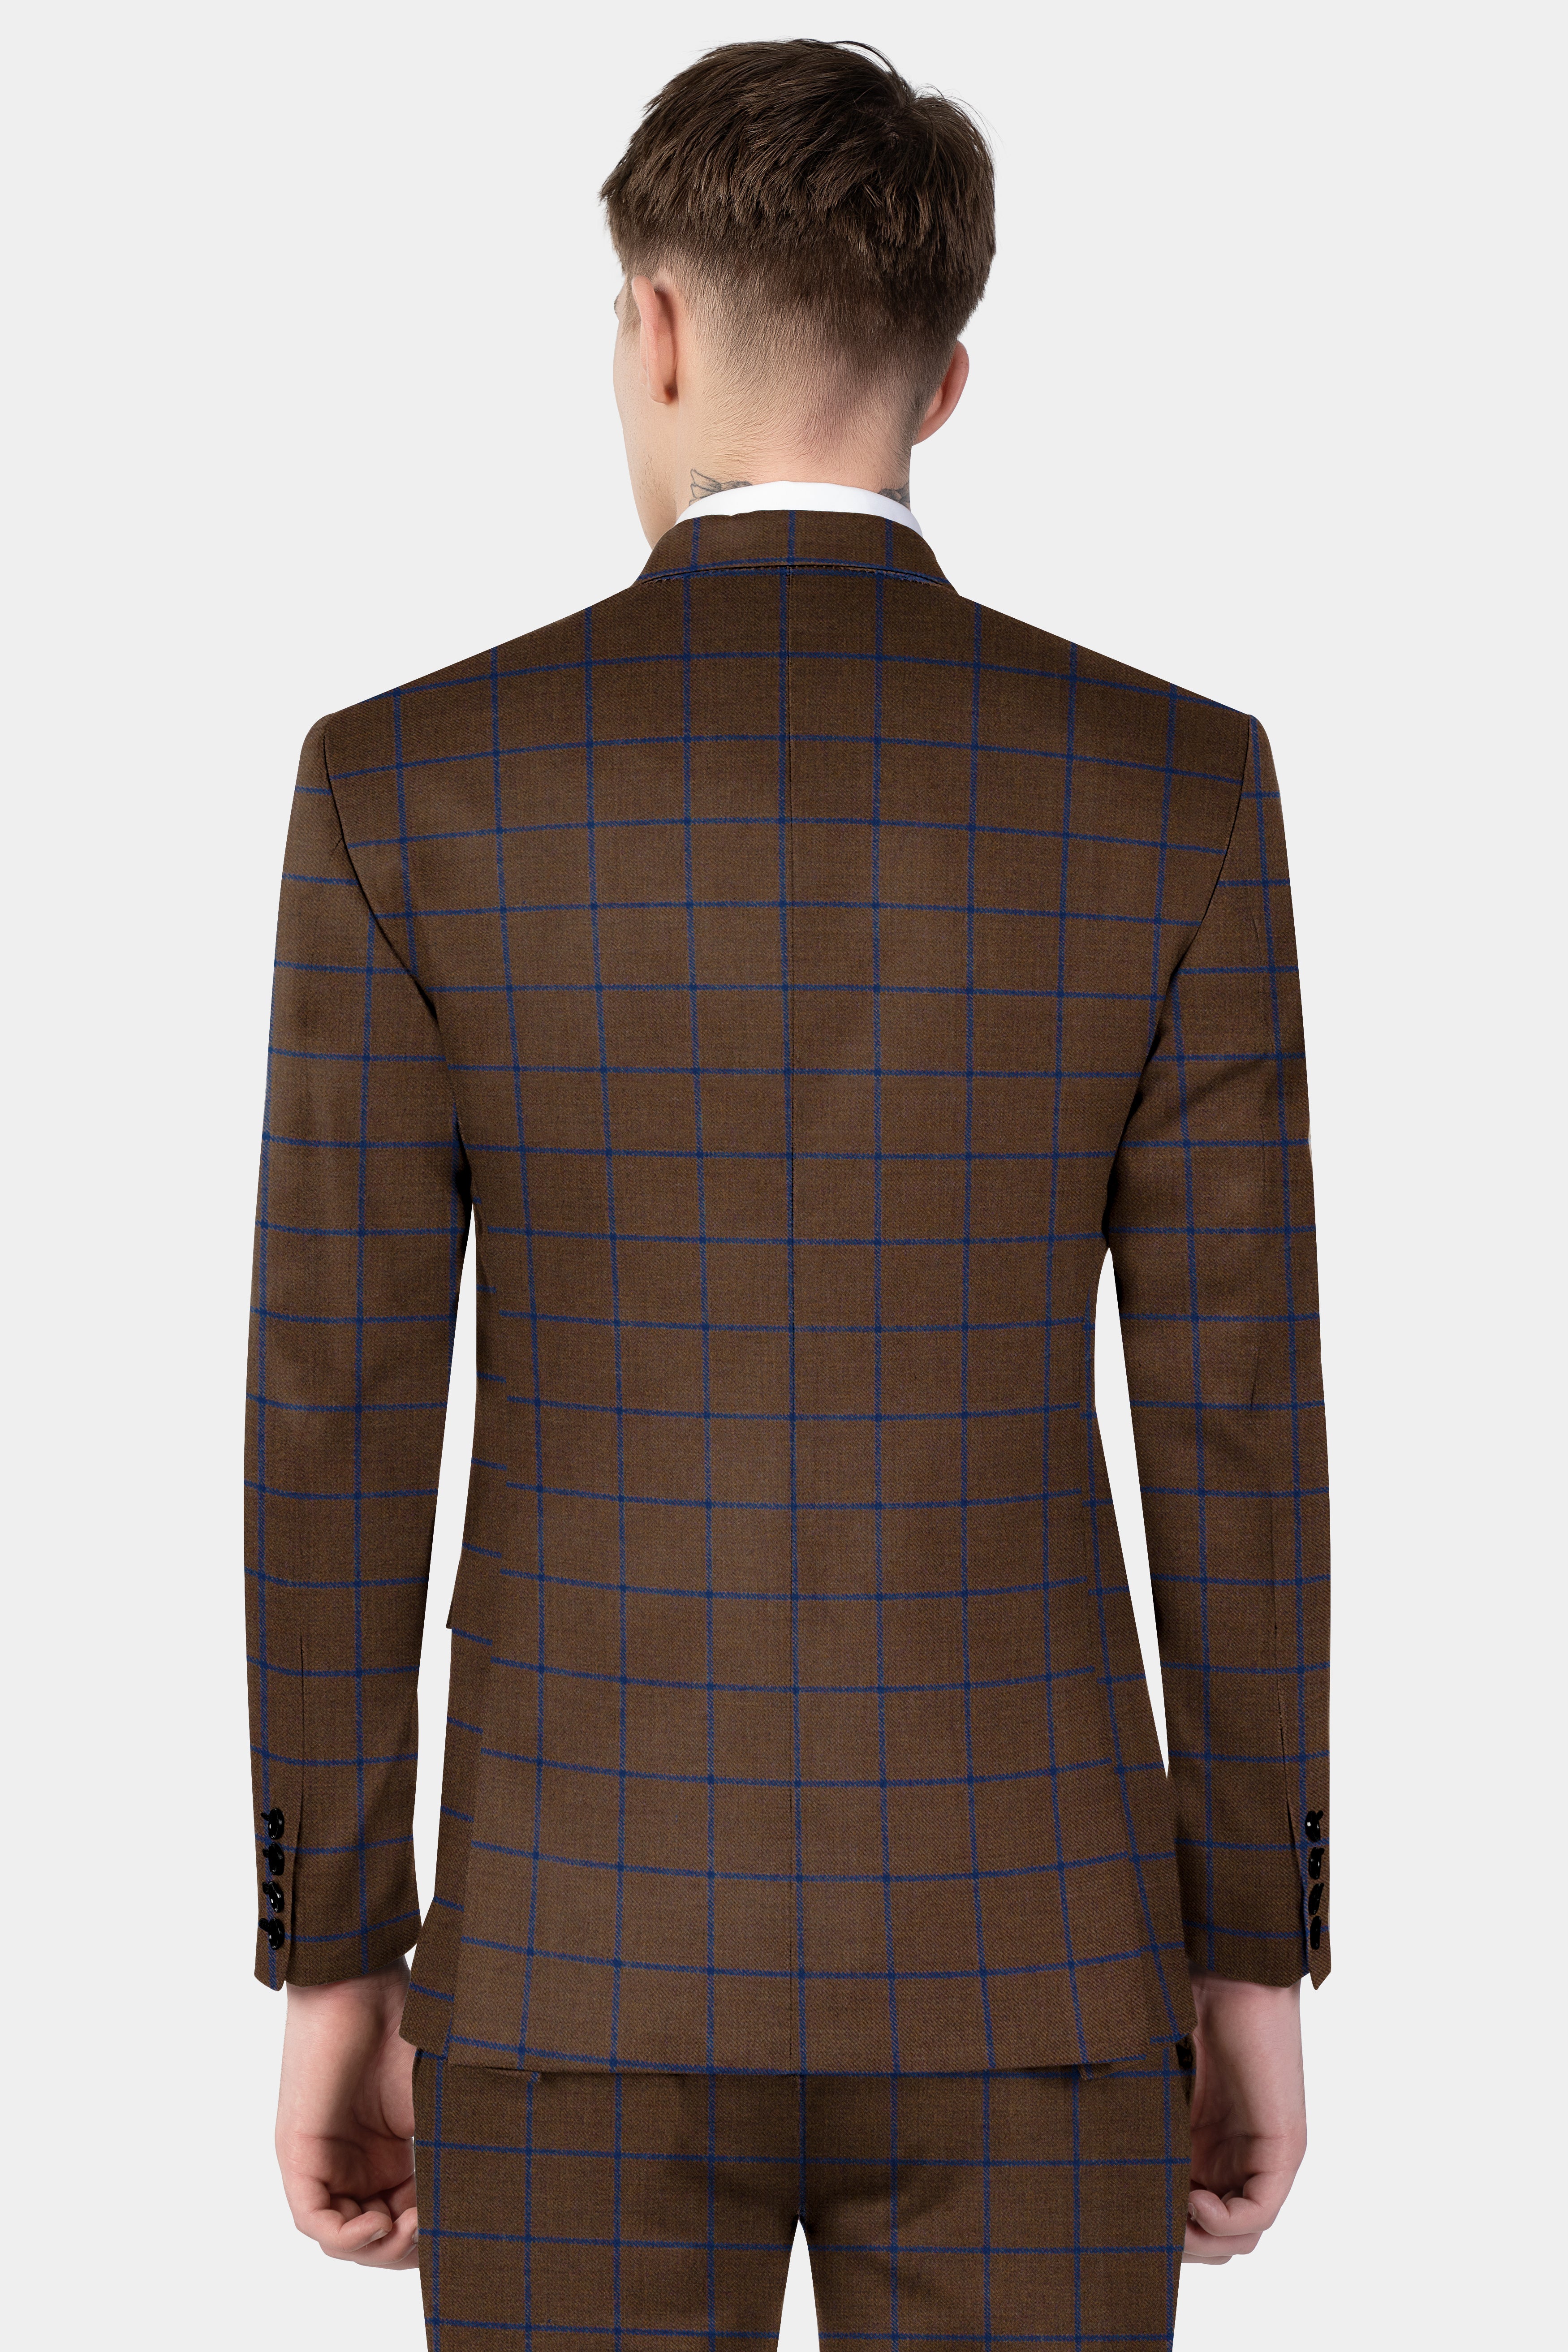 Bistre Brown with Catalina Blue Windowpane Tweed Suit